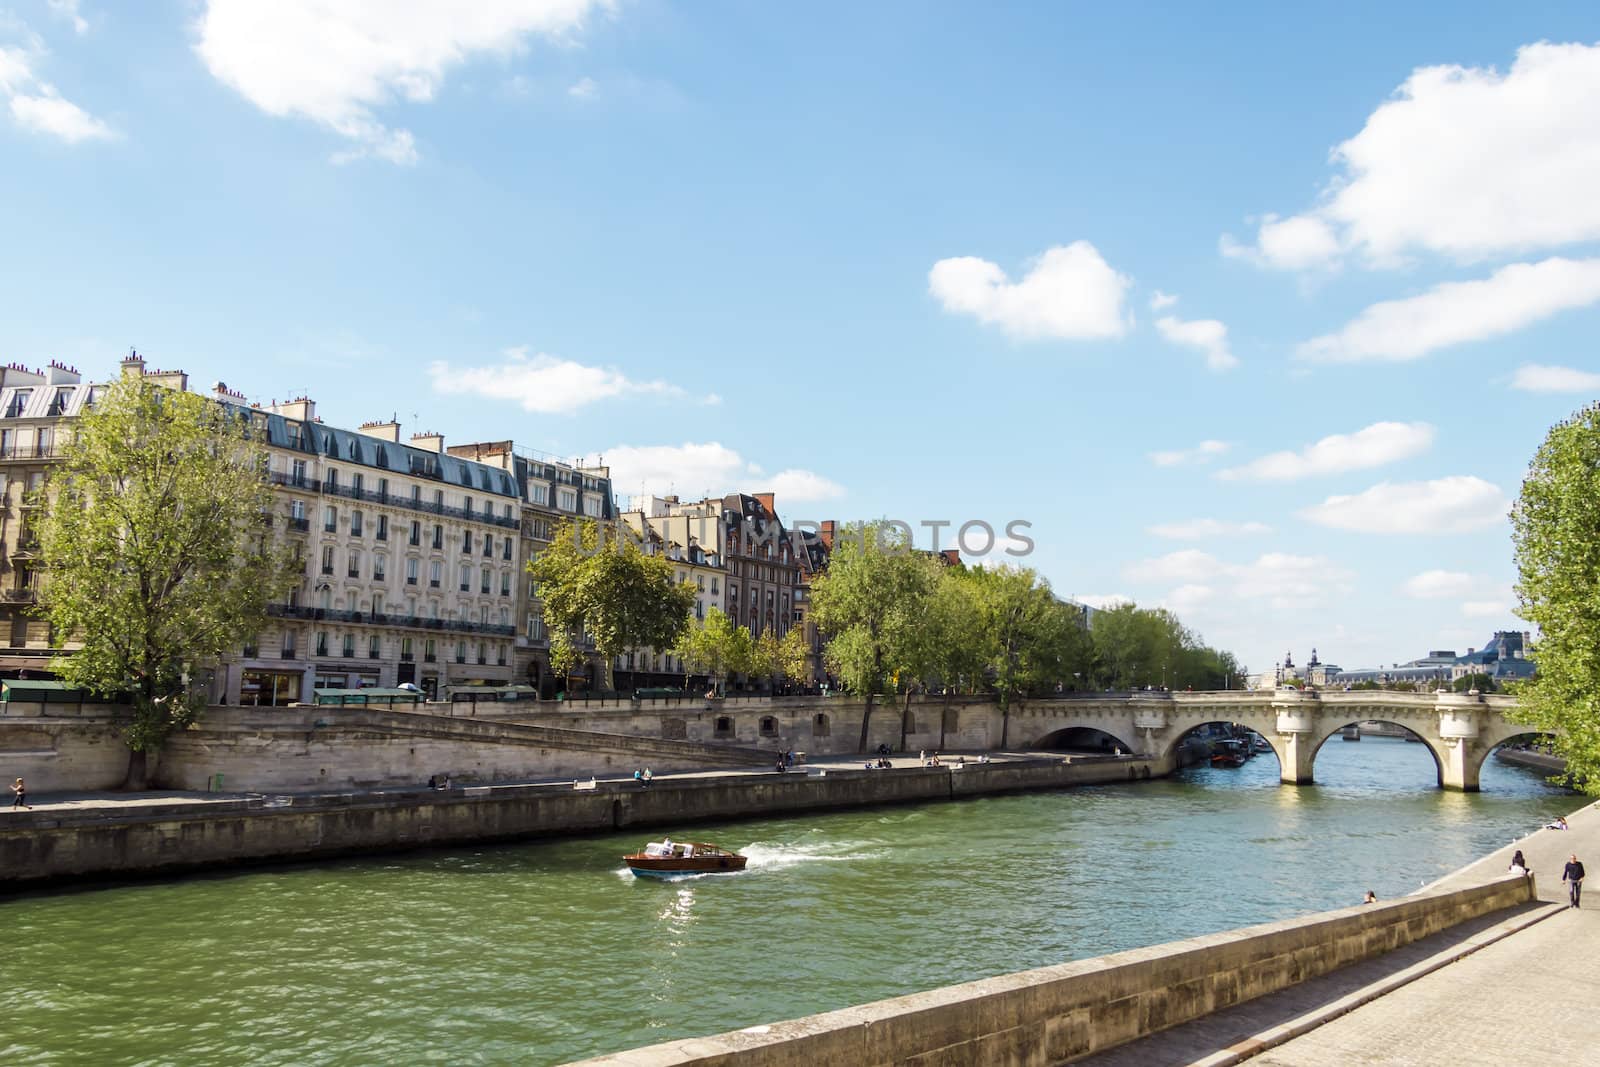 Embankment of the River Seine and the historical architecture in Paris